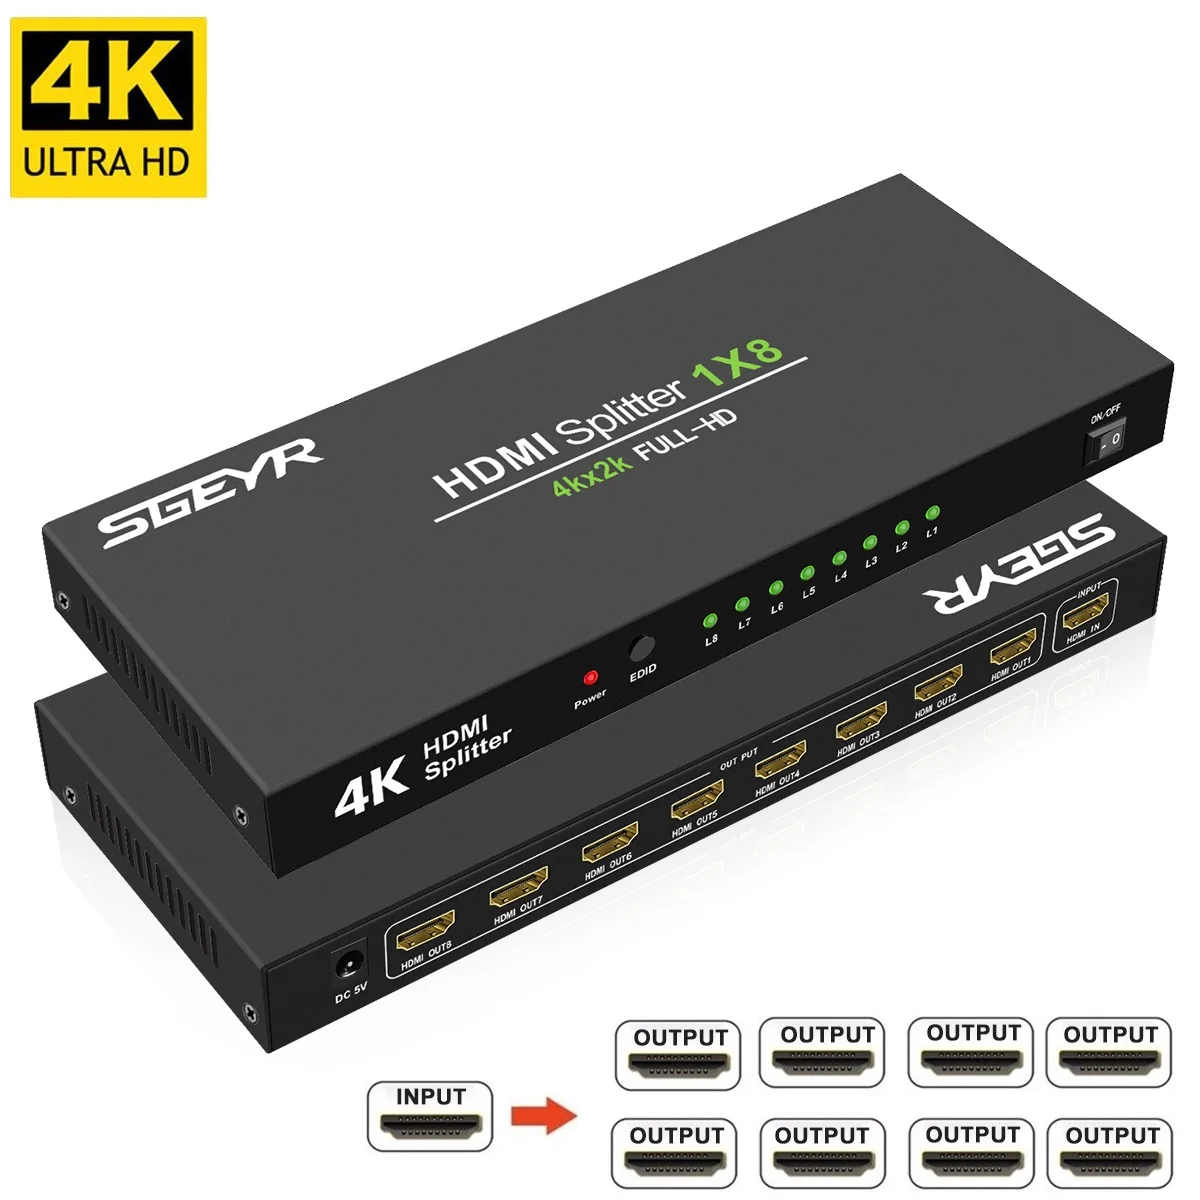 

SGEYR Ultra HD HDMI V1.4 Certified Splitter HDMI 1 In 8 Out Switcher with 4Kx2K@ 30Hz,3840x2160,1080P,3D-1 Source to 8 Displays